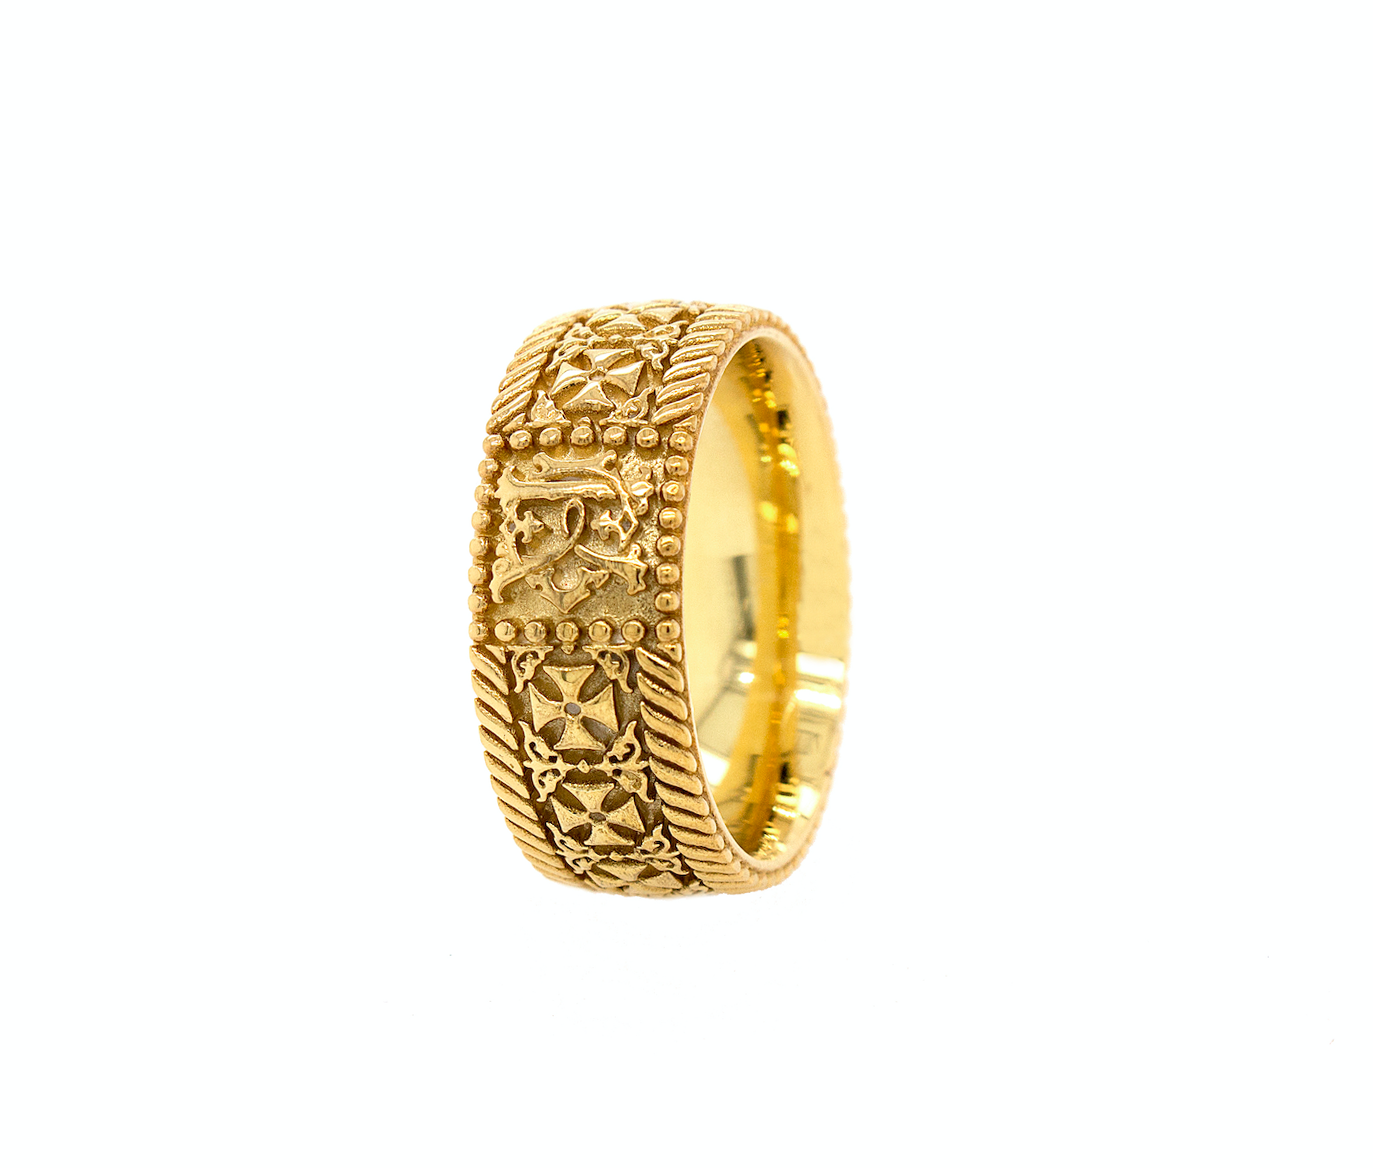 8mm Custom Made Silver Ring with Yellow Gold Plated Interior, Crosses and Custom Monogram 12.5